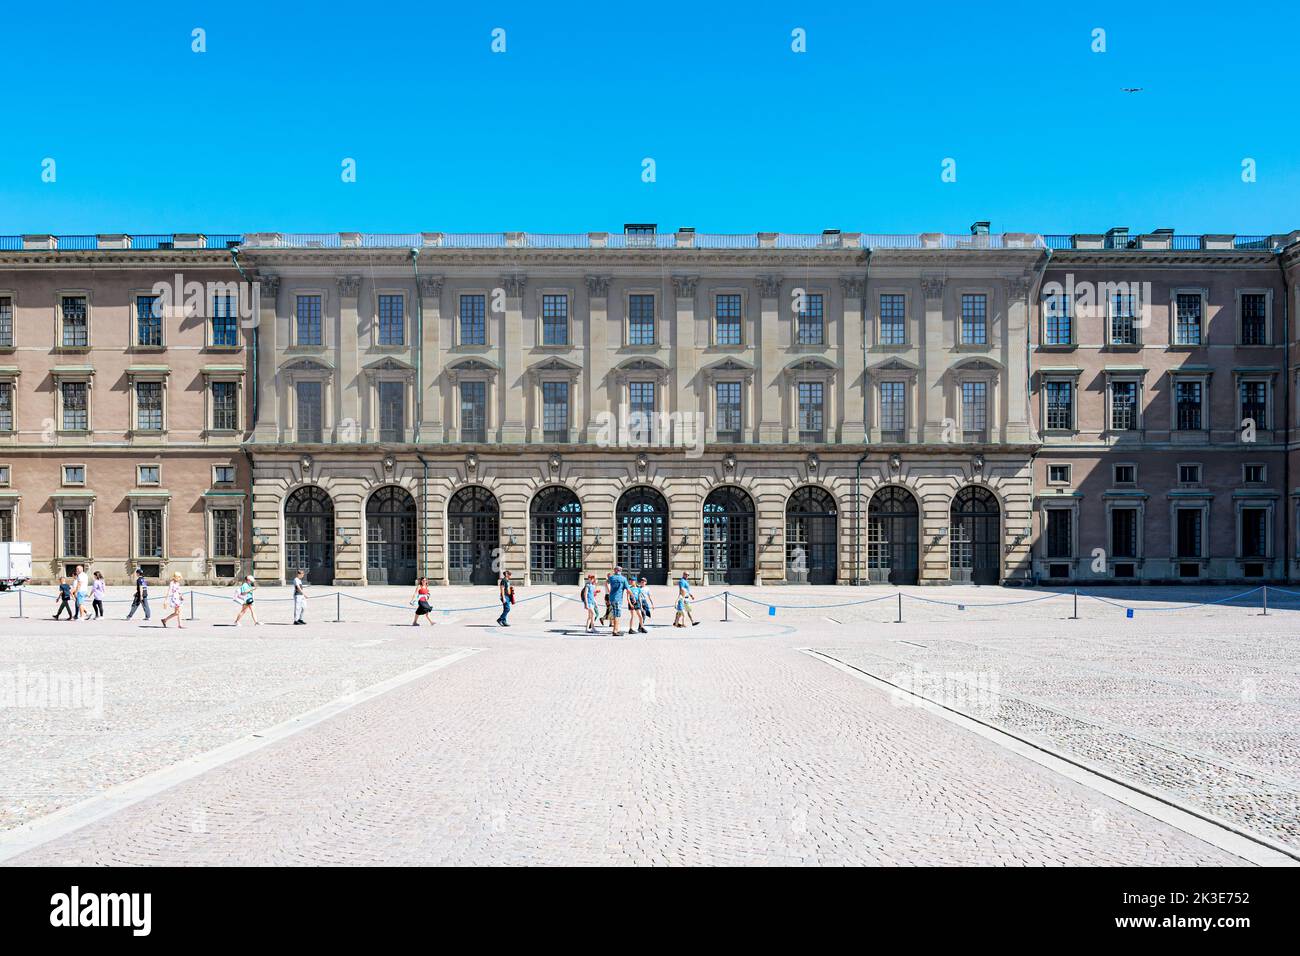 STOCKHOLM, SWEDEN - JULY 31, 2022: Courtyard at the royal palace in the gamla stan area of the city. Stock Photo